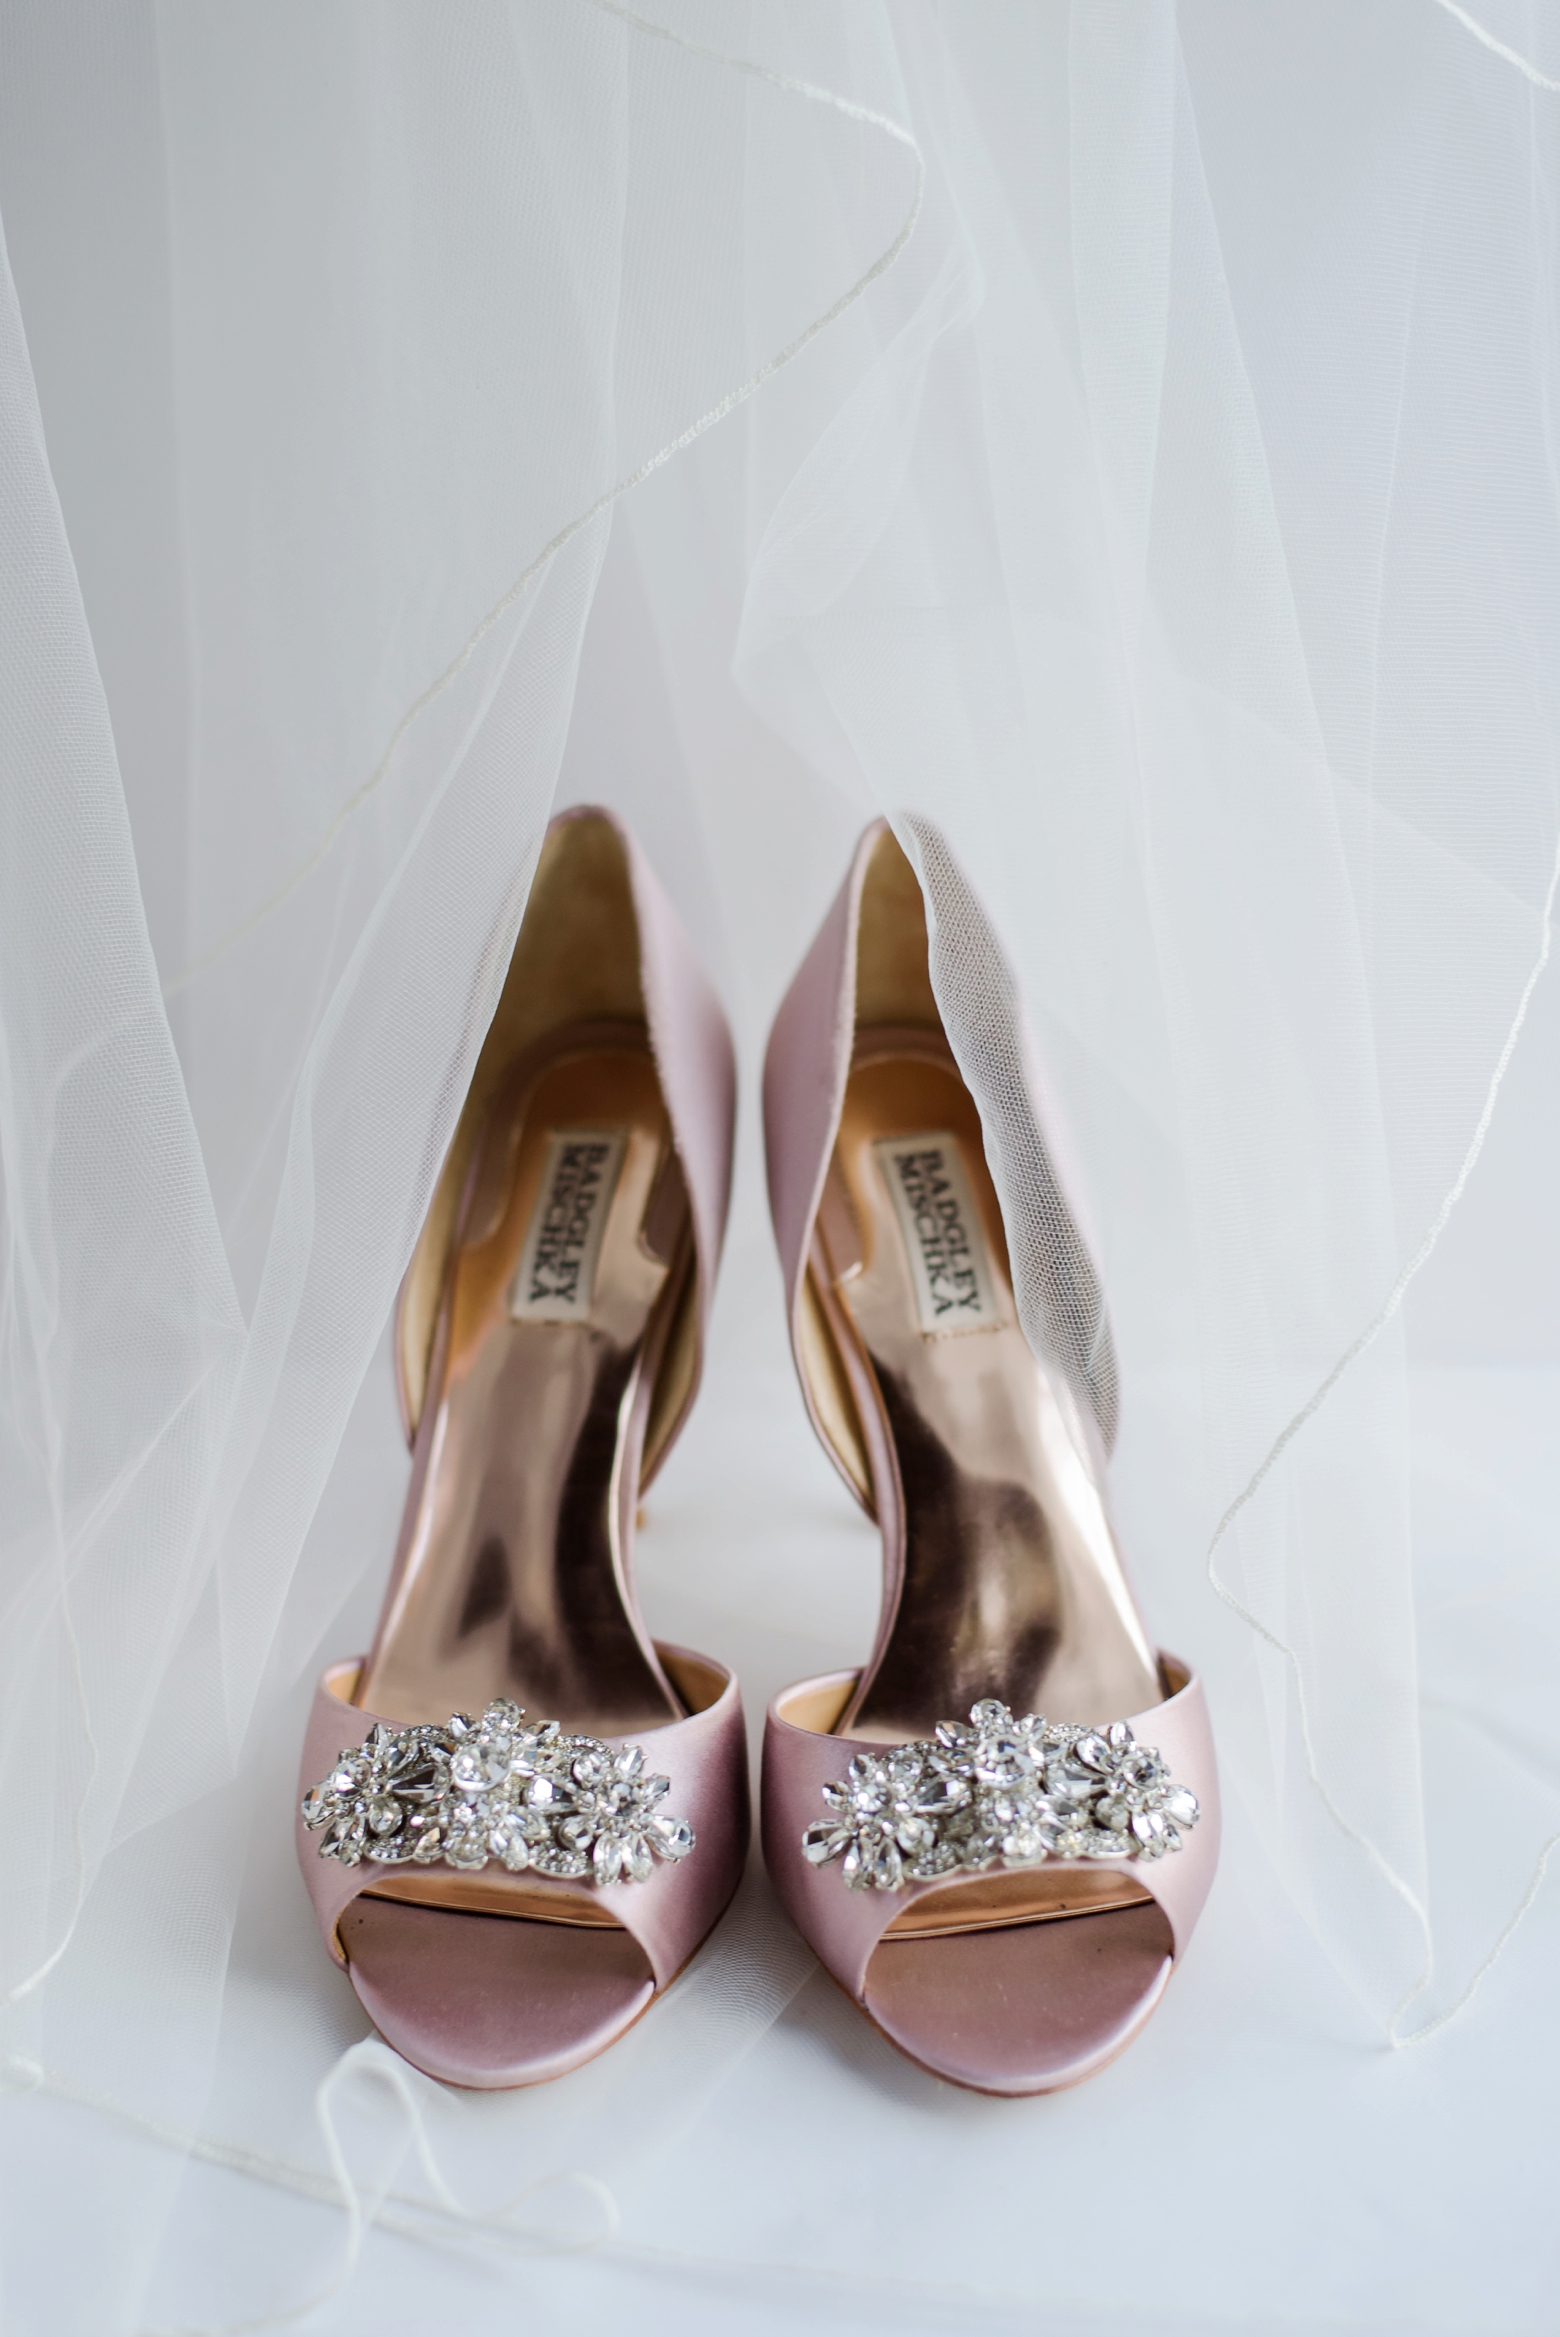 Bridal shoes with diamond accents sitting on the wedding veil tulle